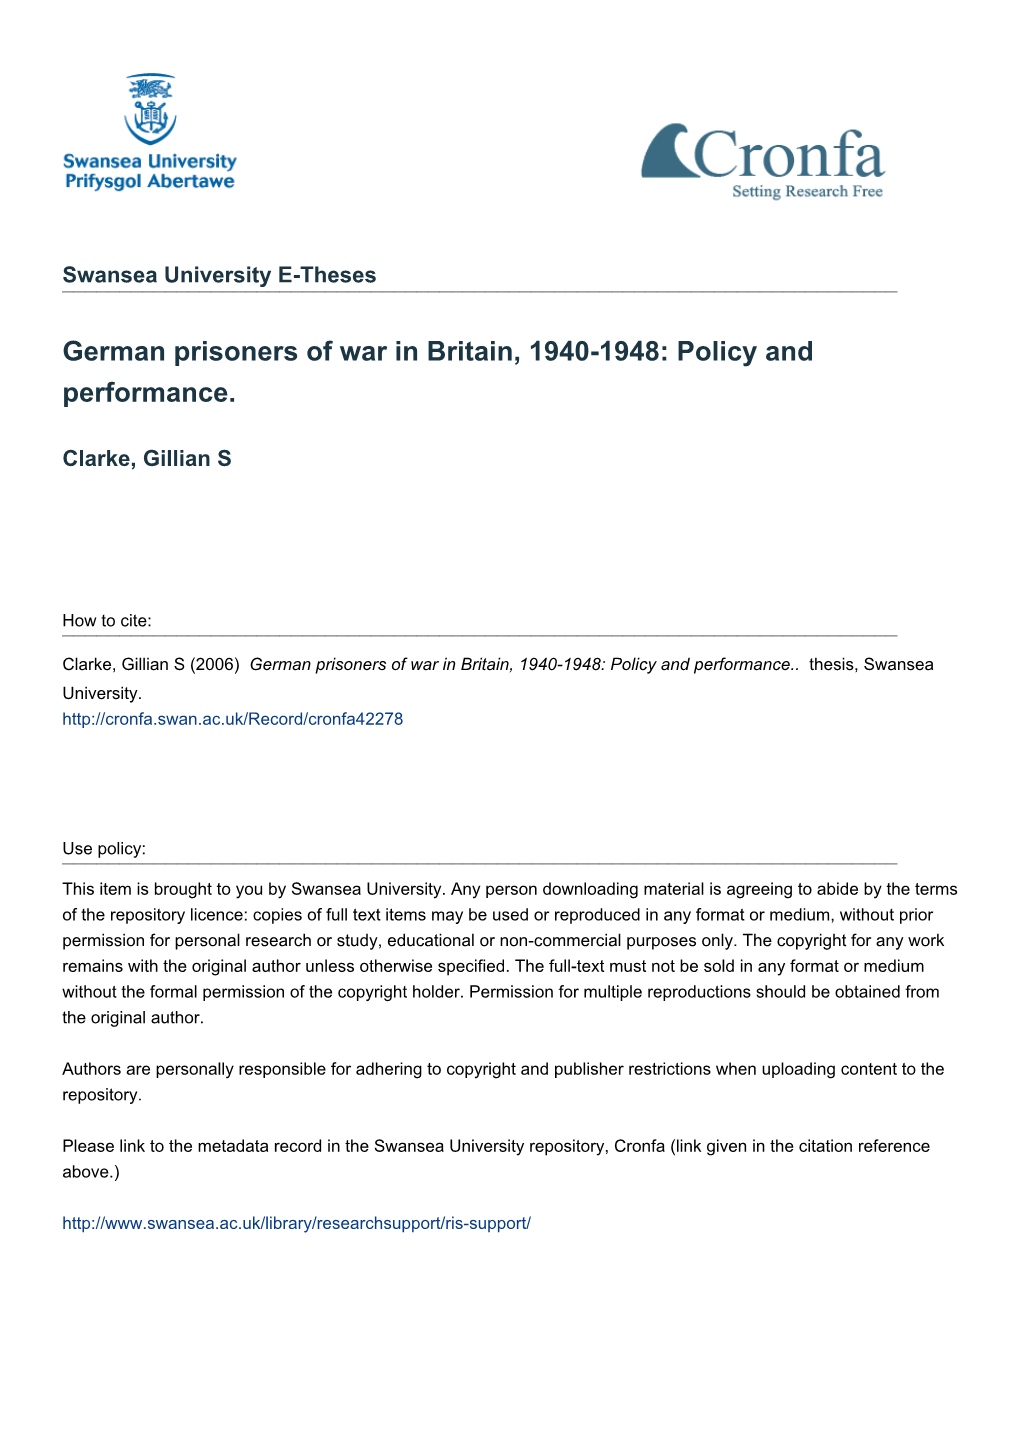 German Prisoners of War in Britain, 1940-1948: Policy and Performance